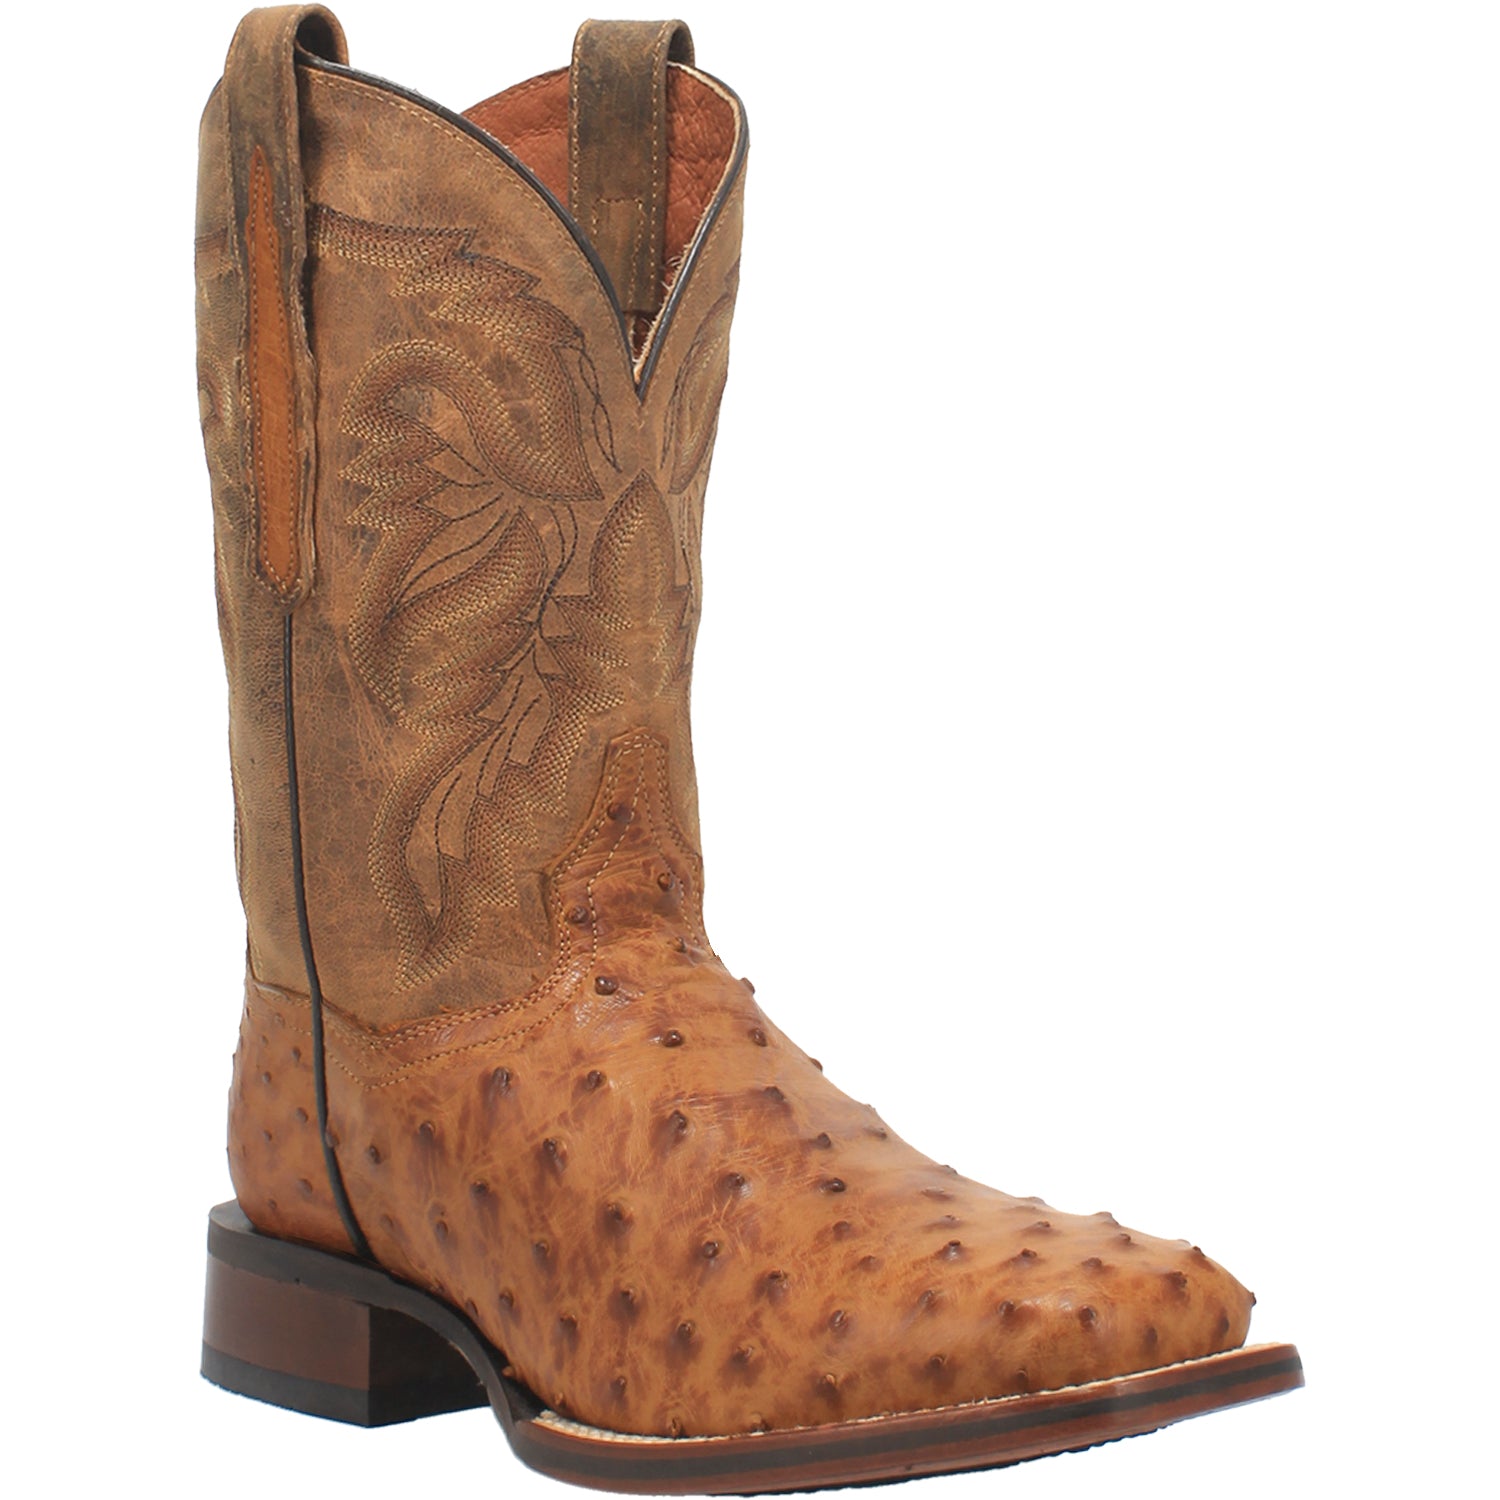 North Mr Revival ALAMOSA FULL QUILL OSTRICH BOOT